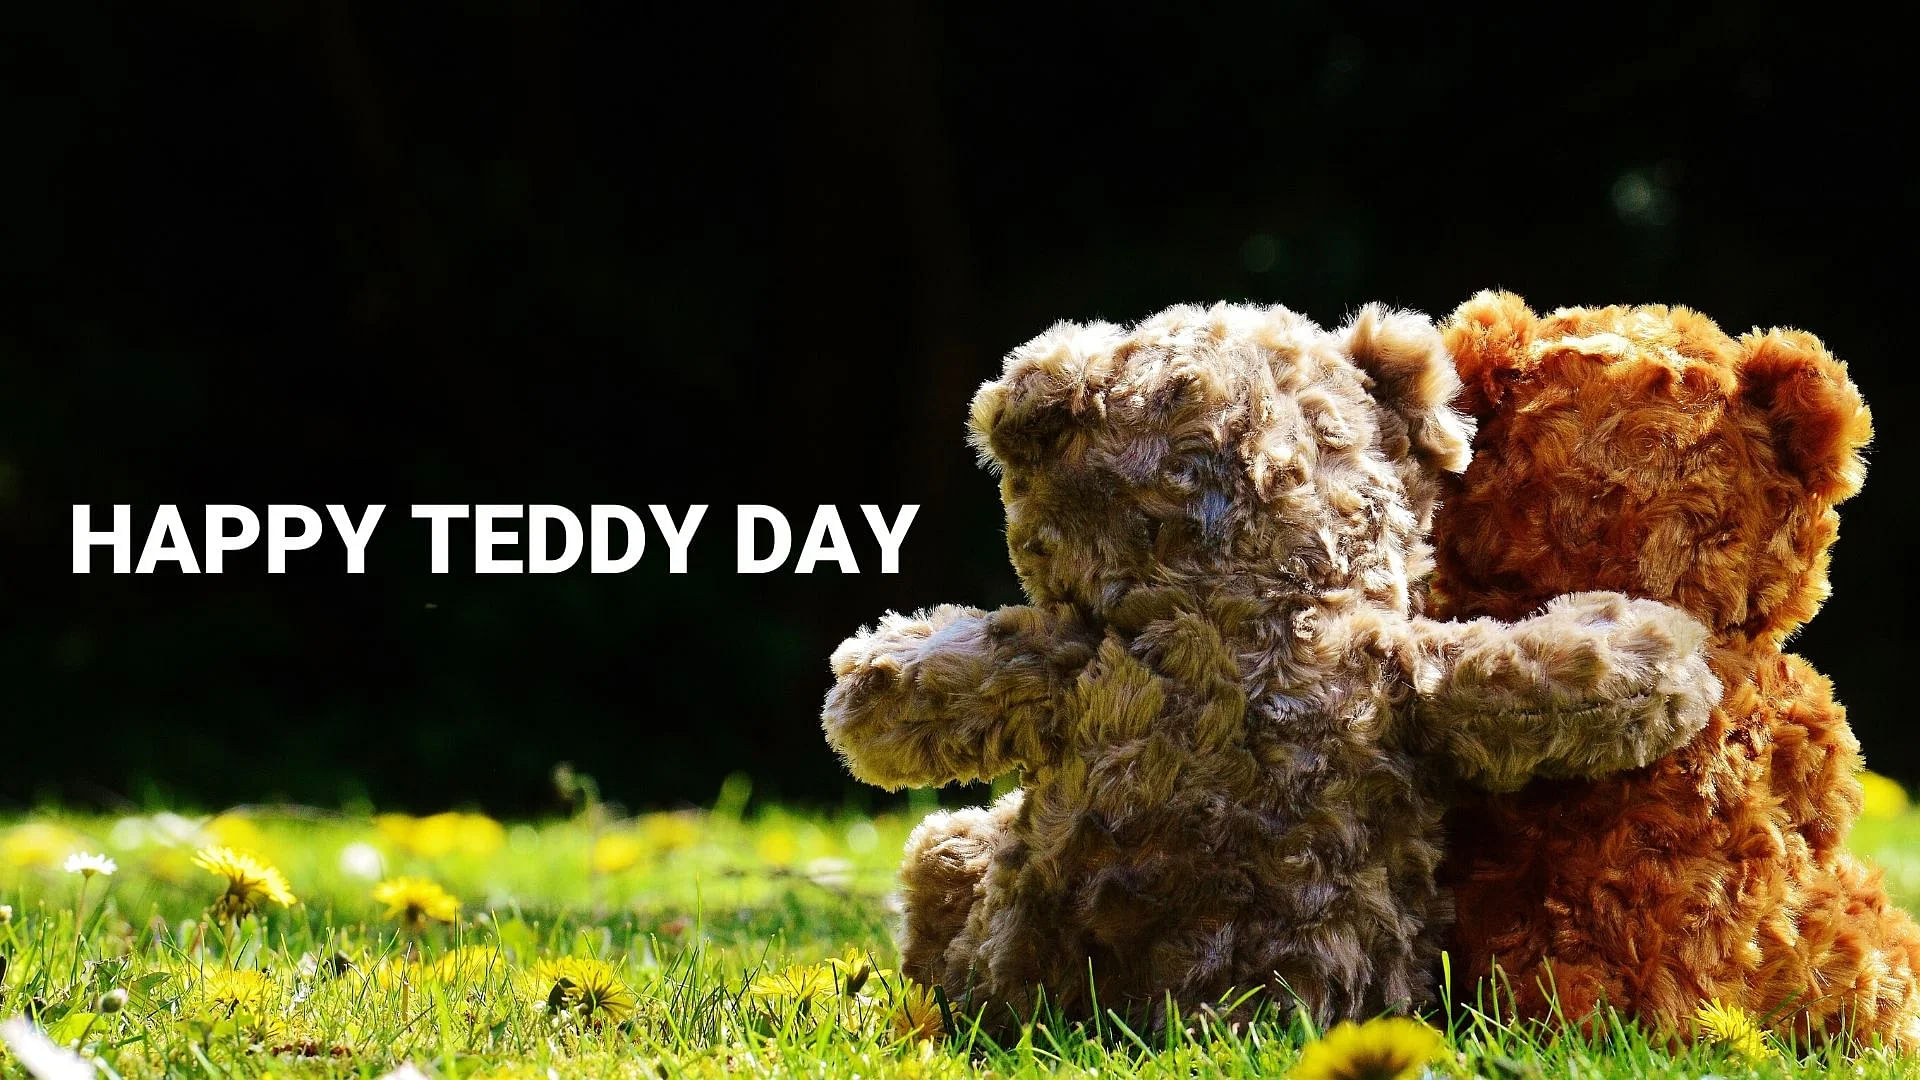 in which day teddy day